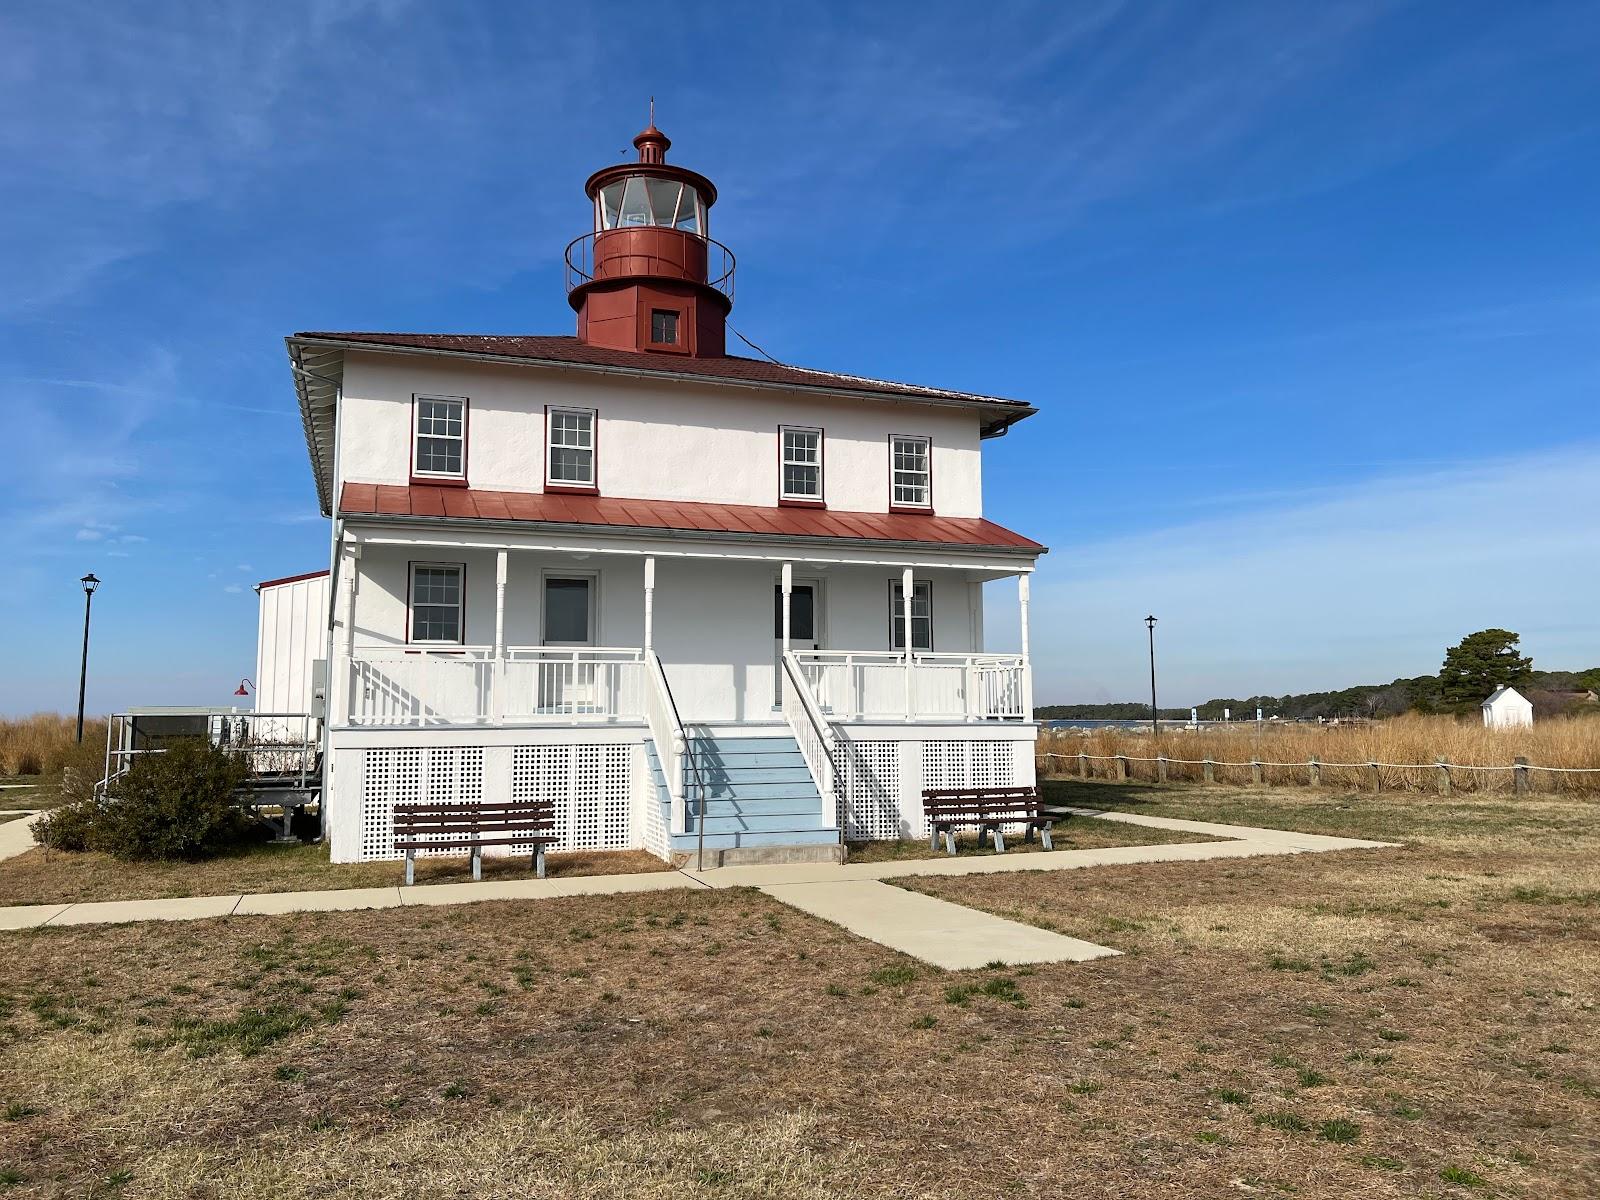 Sandee Point Lookout Lighthouse Photo